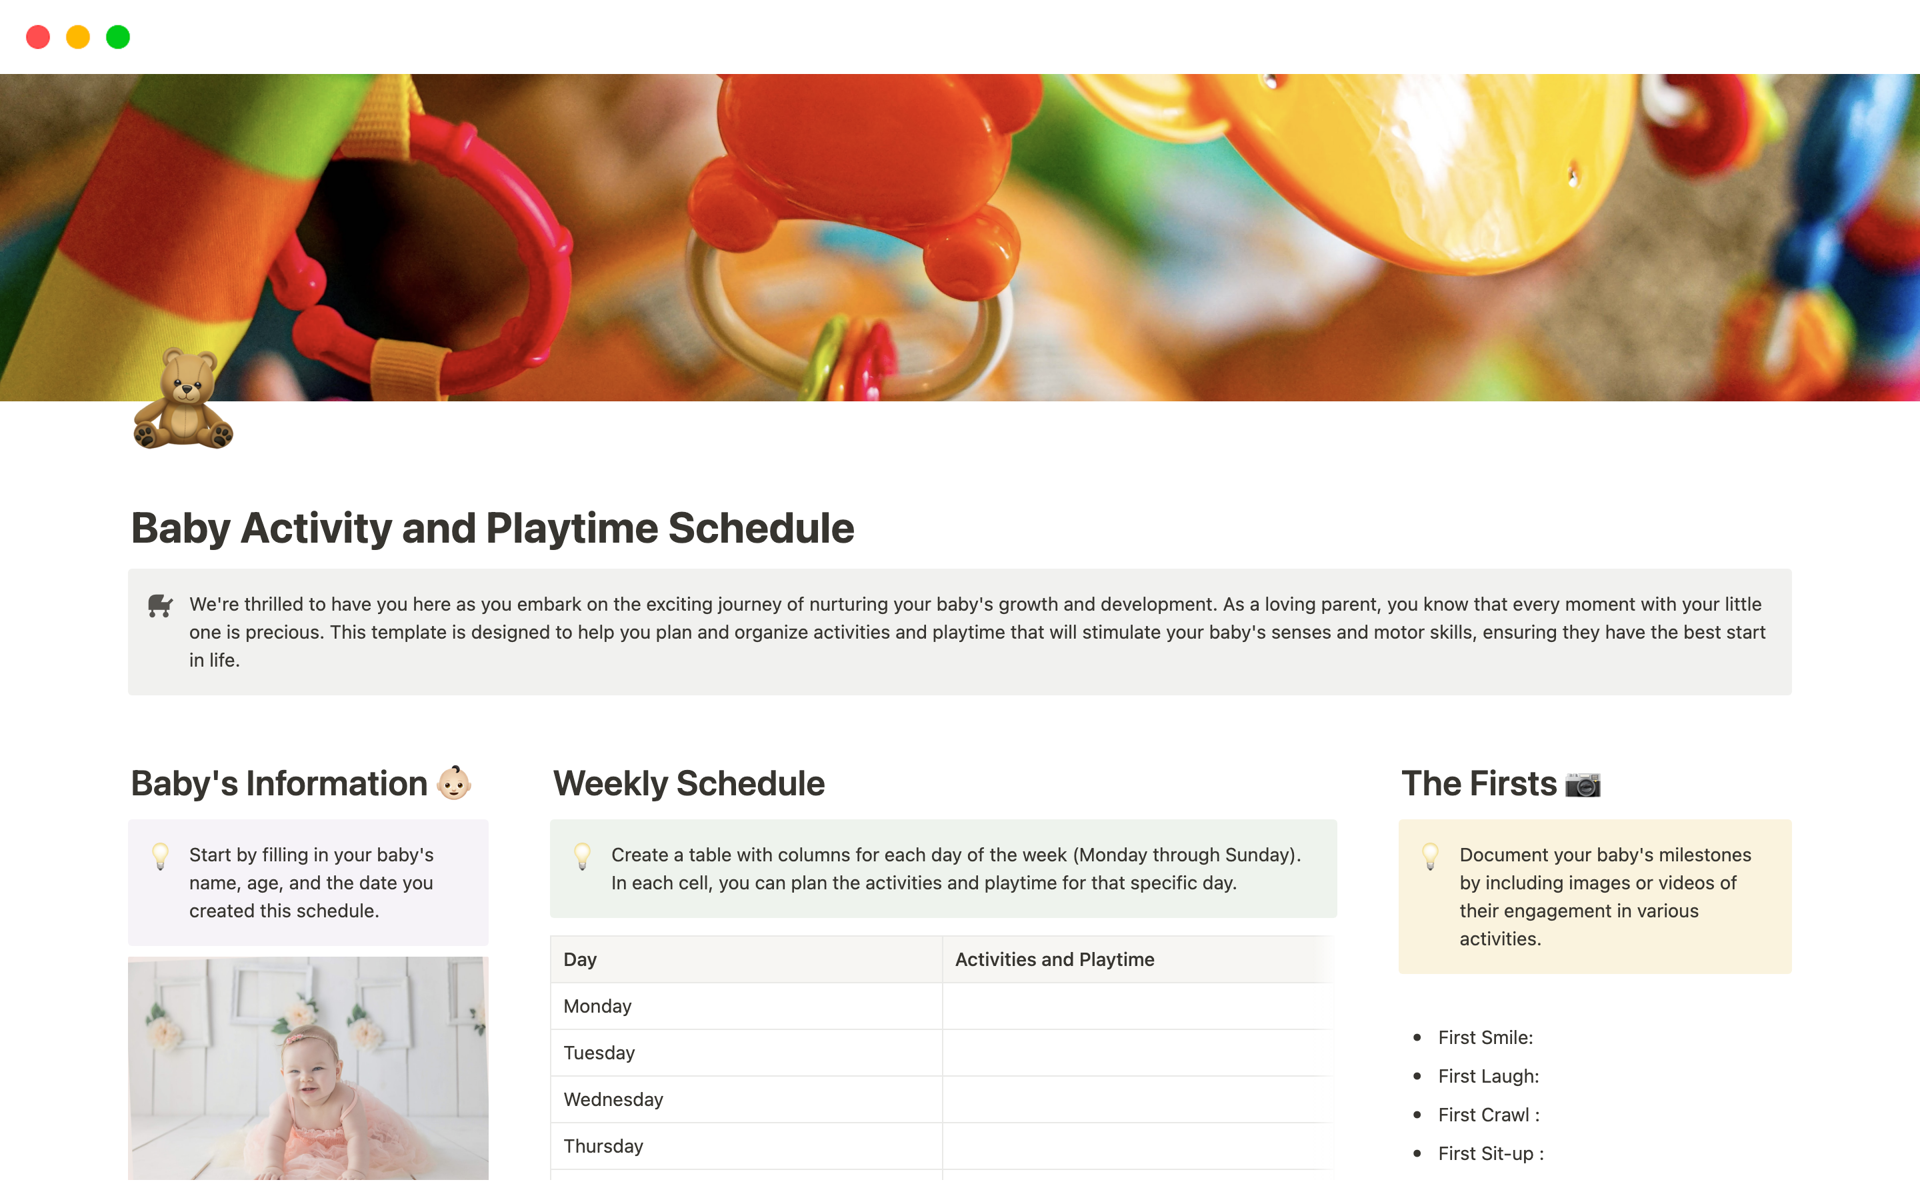 The Baby Activity and Playtime Schedule template is perfect companion for parents and caregivers dedicated to providing the best possible start for their precious little ones.
